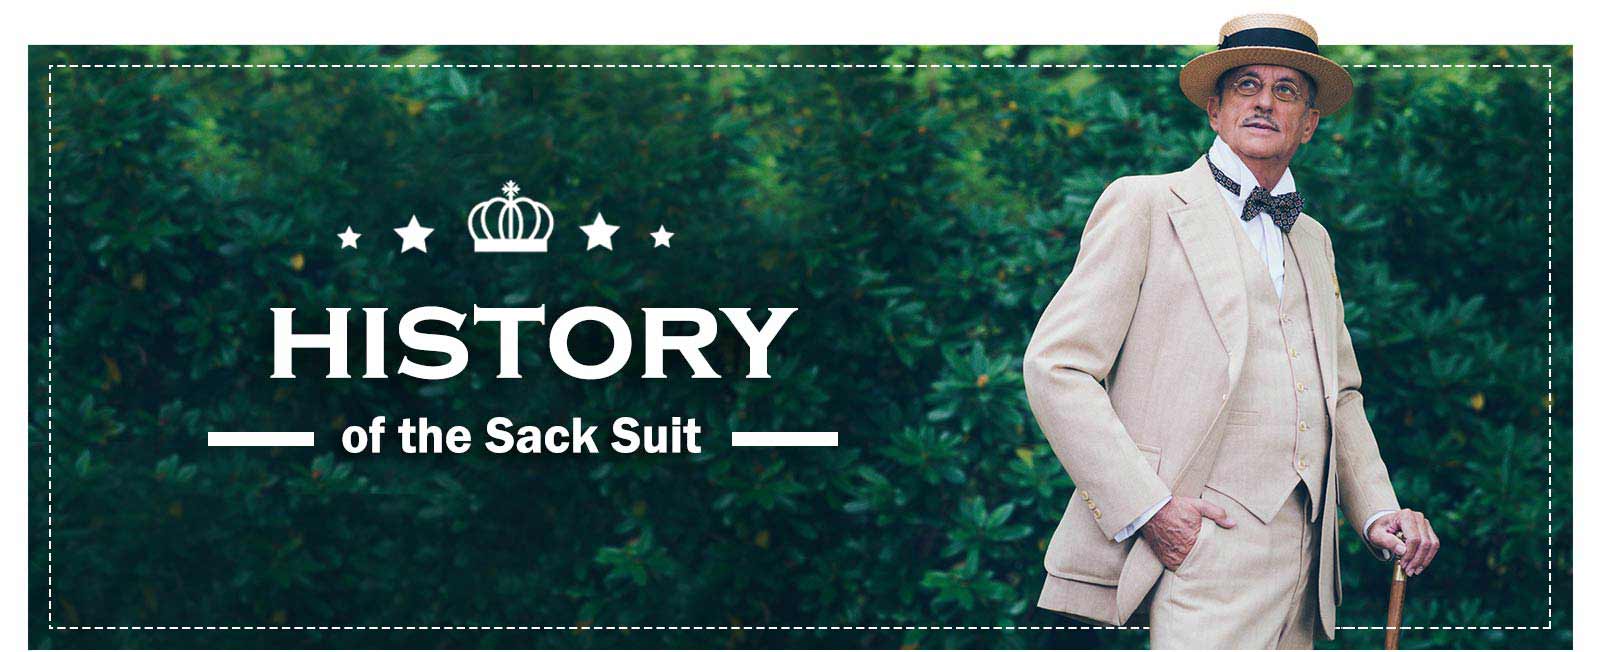 History of the sack suit